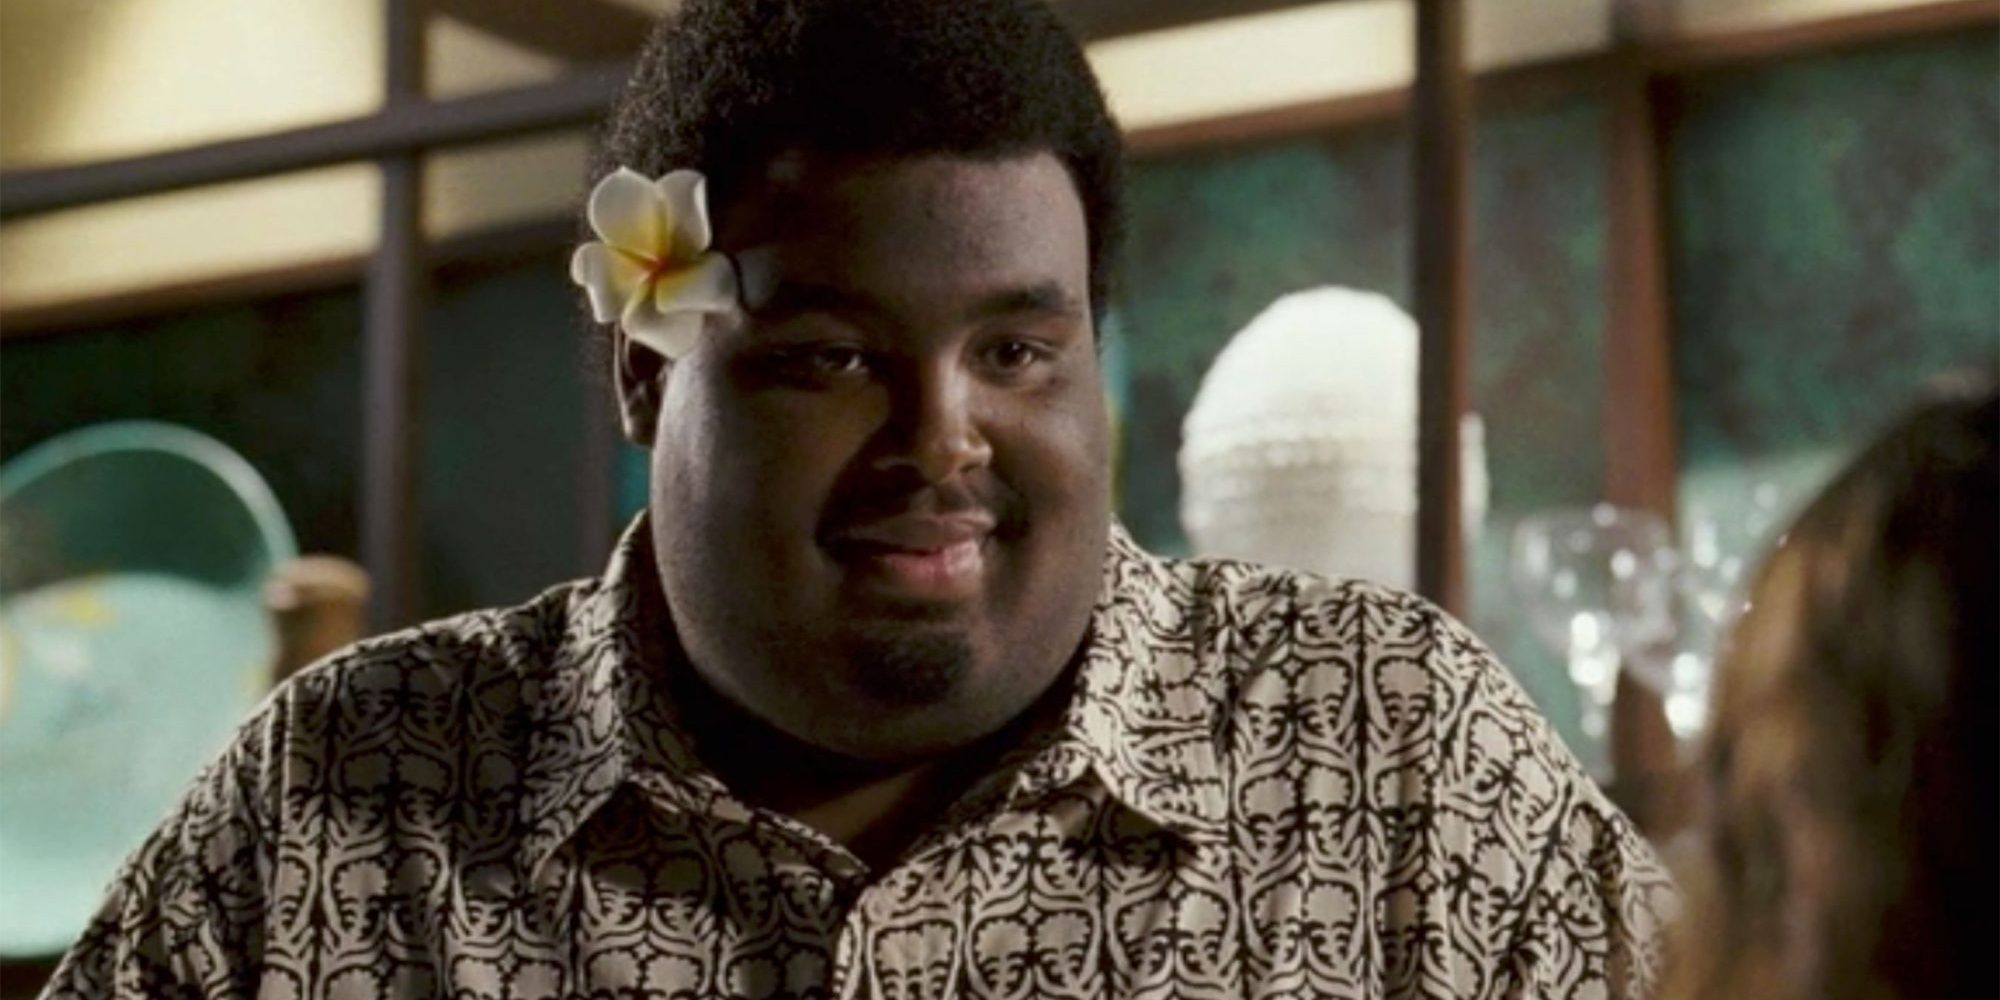 Dwayne the bartender in Forgetting Sarah Marshall